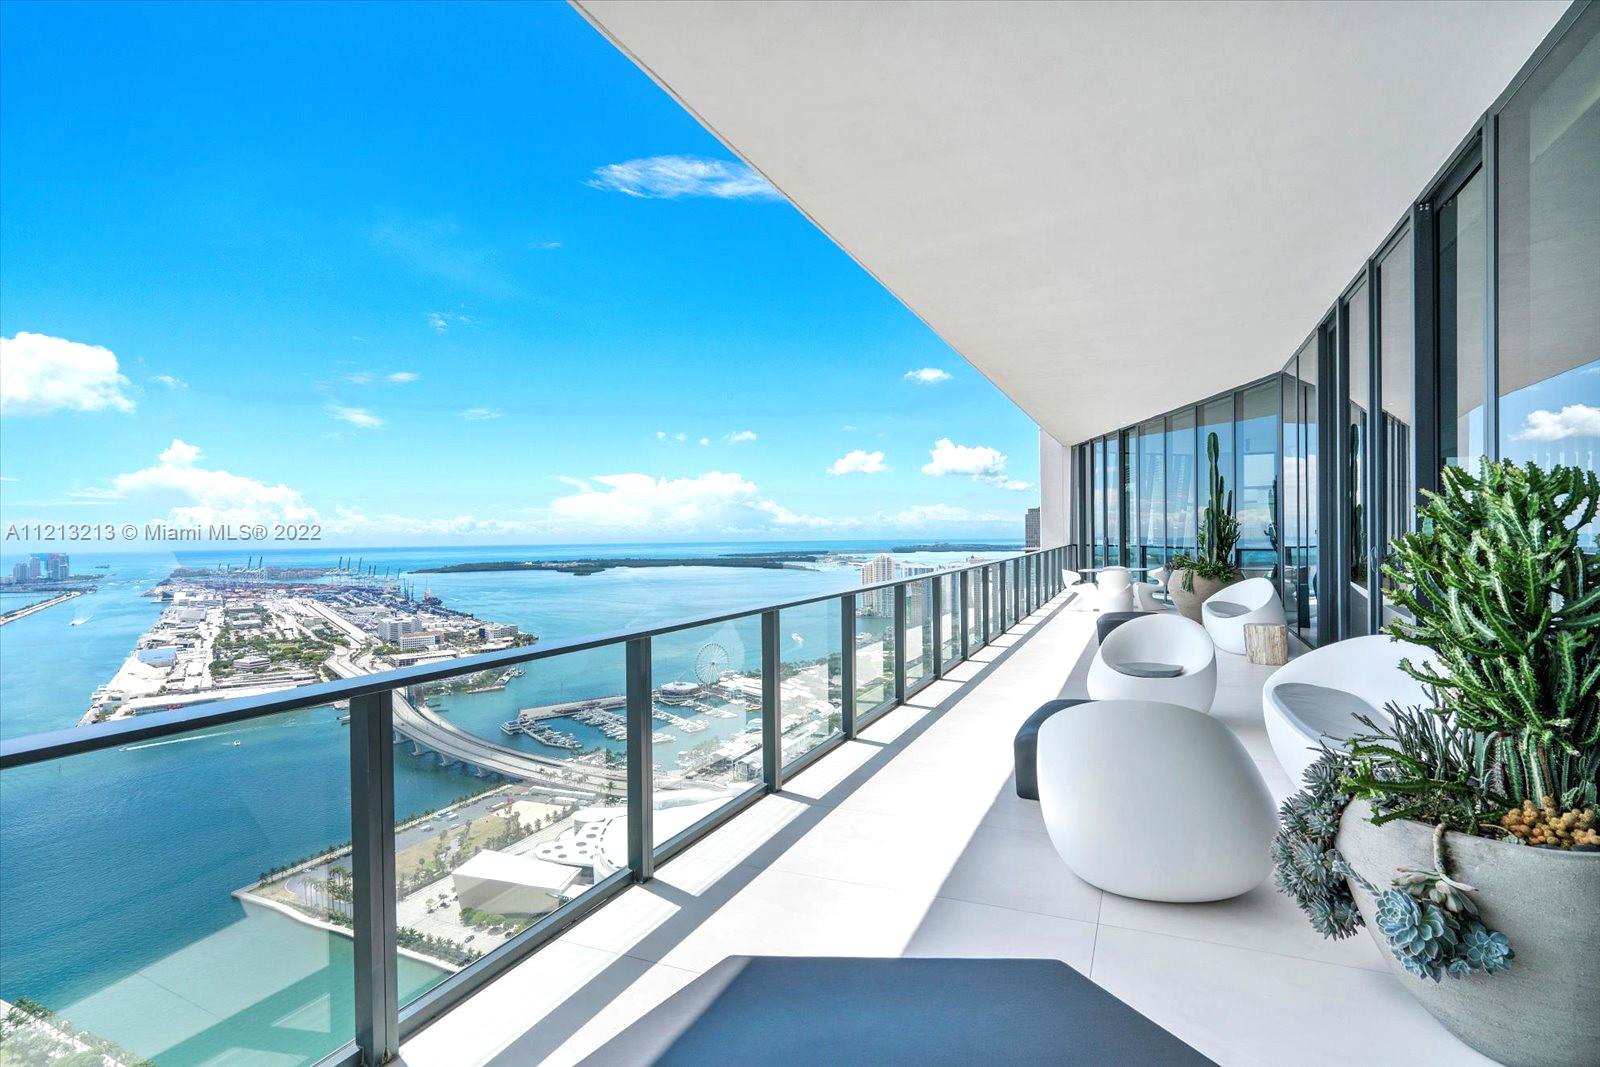 Welcome the most desirable penthouse in Miami. One Thousand Museum, artfully crafted by world-renown architect Zaha Hadid, feat. this jaw dropping 5 bd, 6.5 ba, full floor masterpiece w/ immaculate 360 degree views of Miami, combining the city’s glamourous allure & endless ocean captured from the oversized terrace & living spaces. Top-of-the-line finishes w/ custom details, make this extraordinary residence a genuine treasure. This is the only residential building in the US w/ a helipad, allowing residents to take their helicopter directly from the roof to wherever they please. Amenities incl. smart technology, indoor/outdoor state-of-the-art wellness facility & spa, sculptural sun & swim terrace, Sky Lounge for private events & more. 9,910 living sf | 1,216 balcony sf | 11,126 total sf